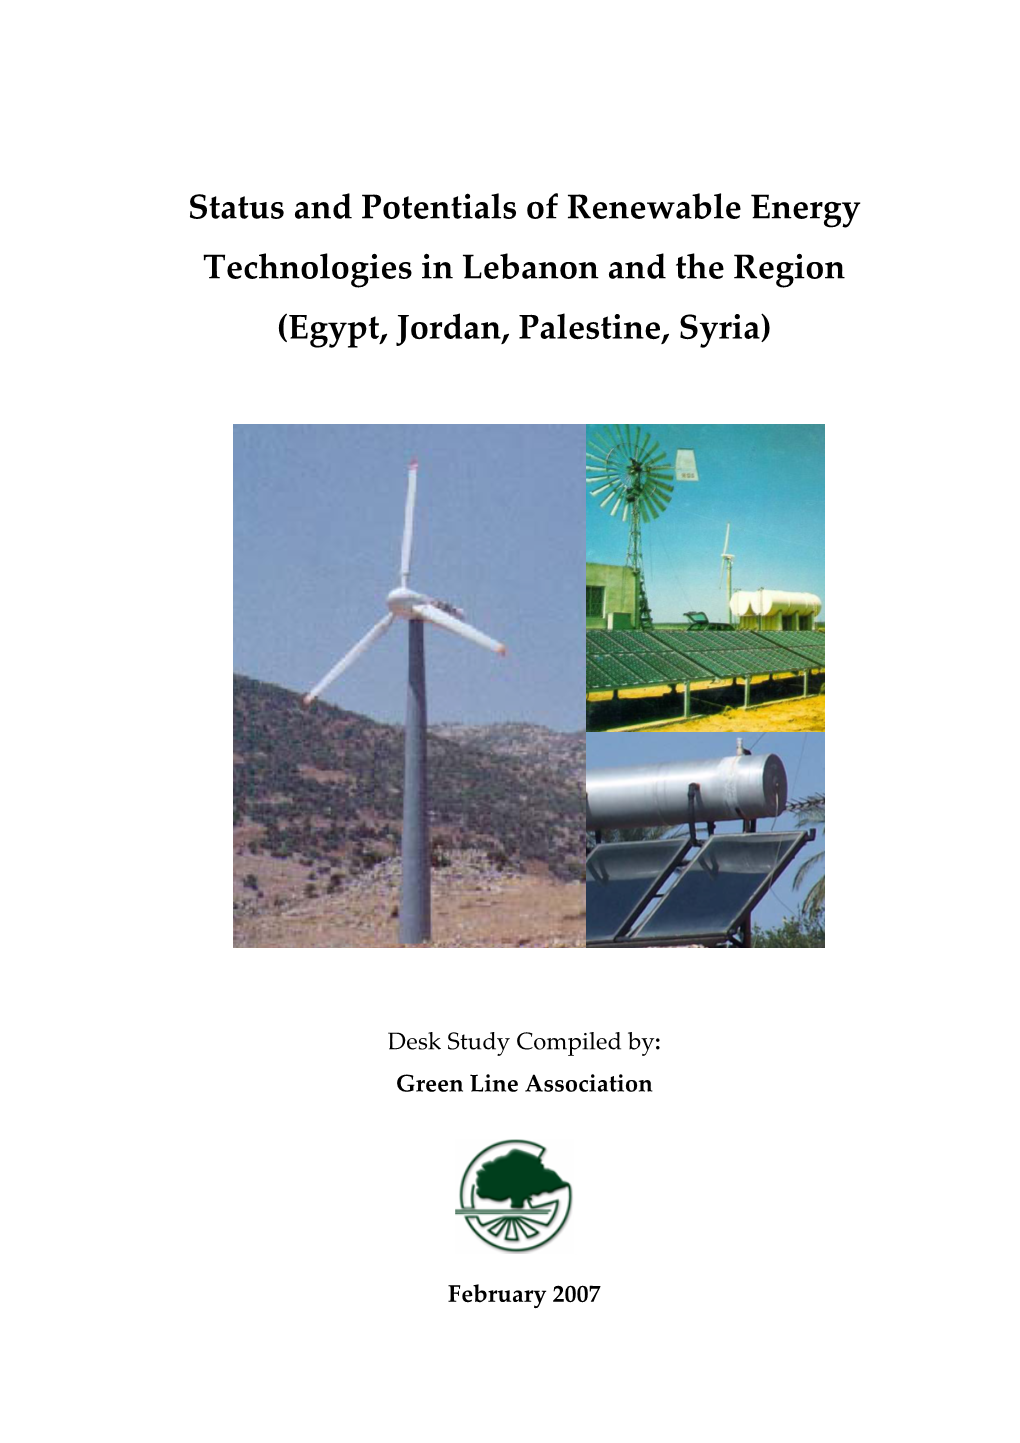 Status and Potentials of Renewable Energy Technologies in Lebanon and the Region (Egypt, Jordan, Palestine, Syria)